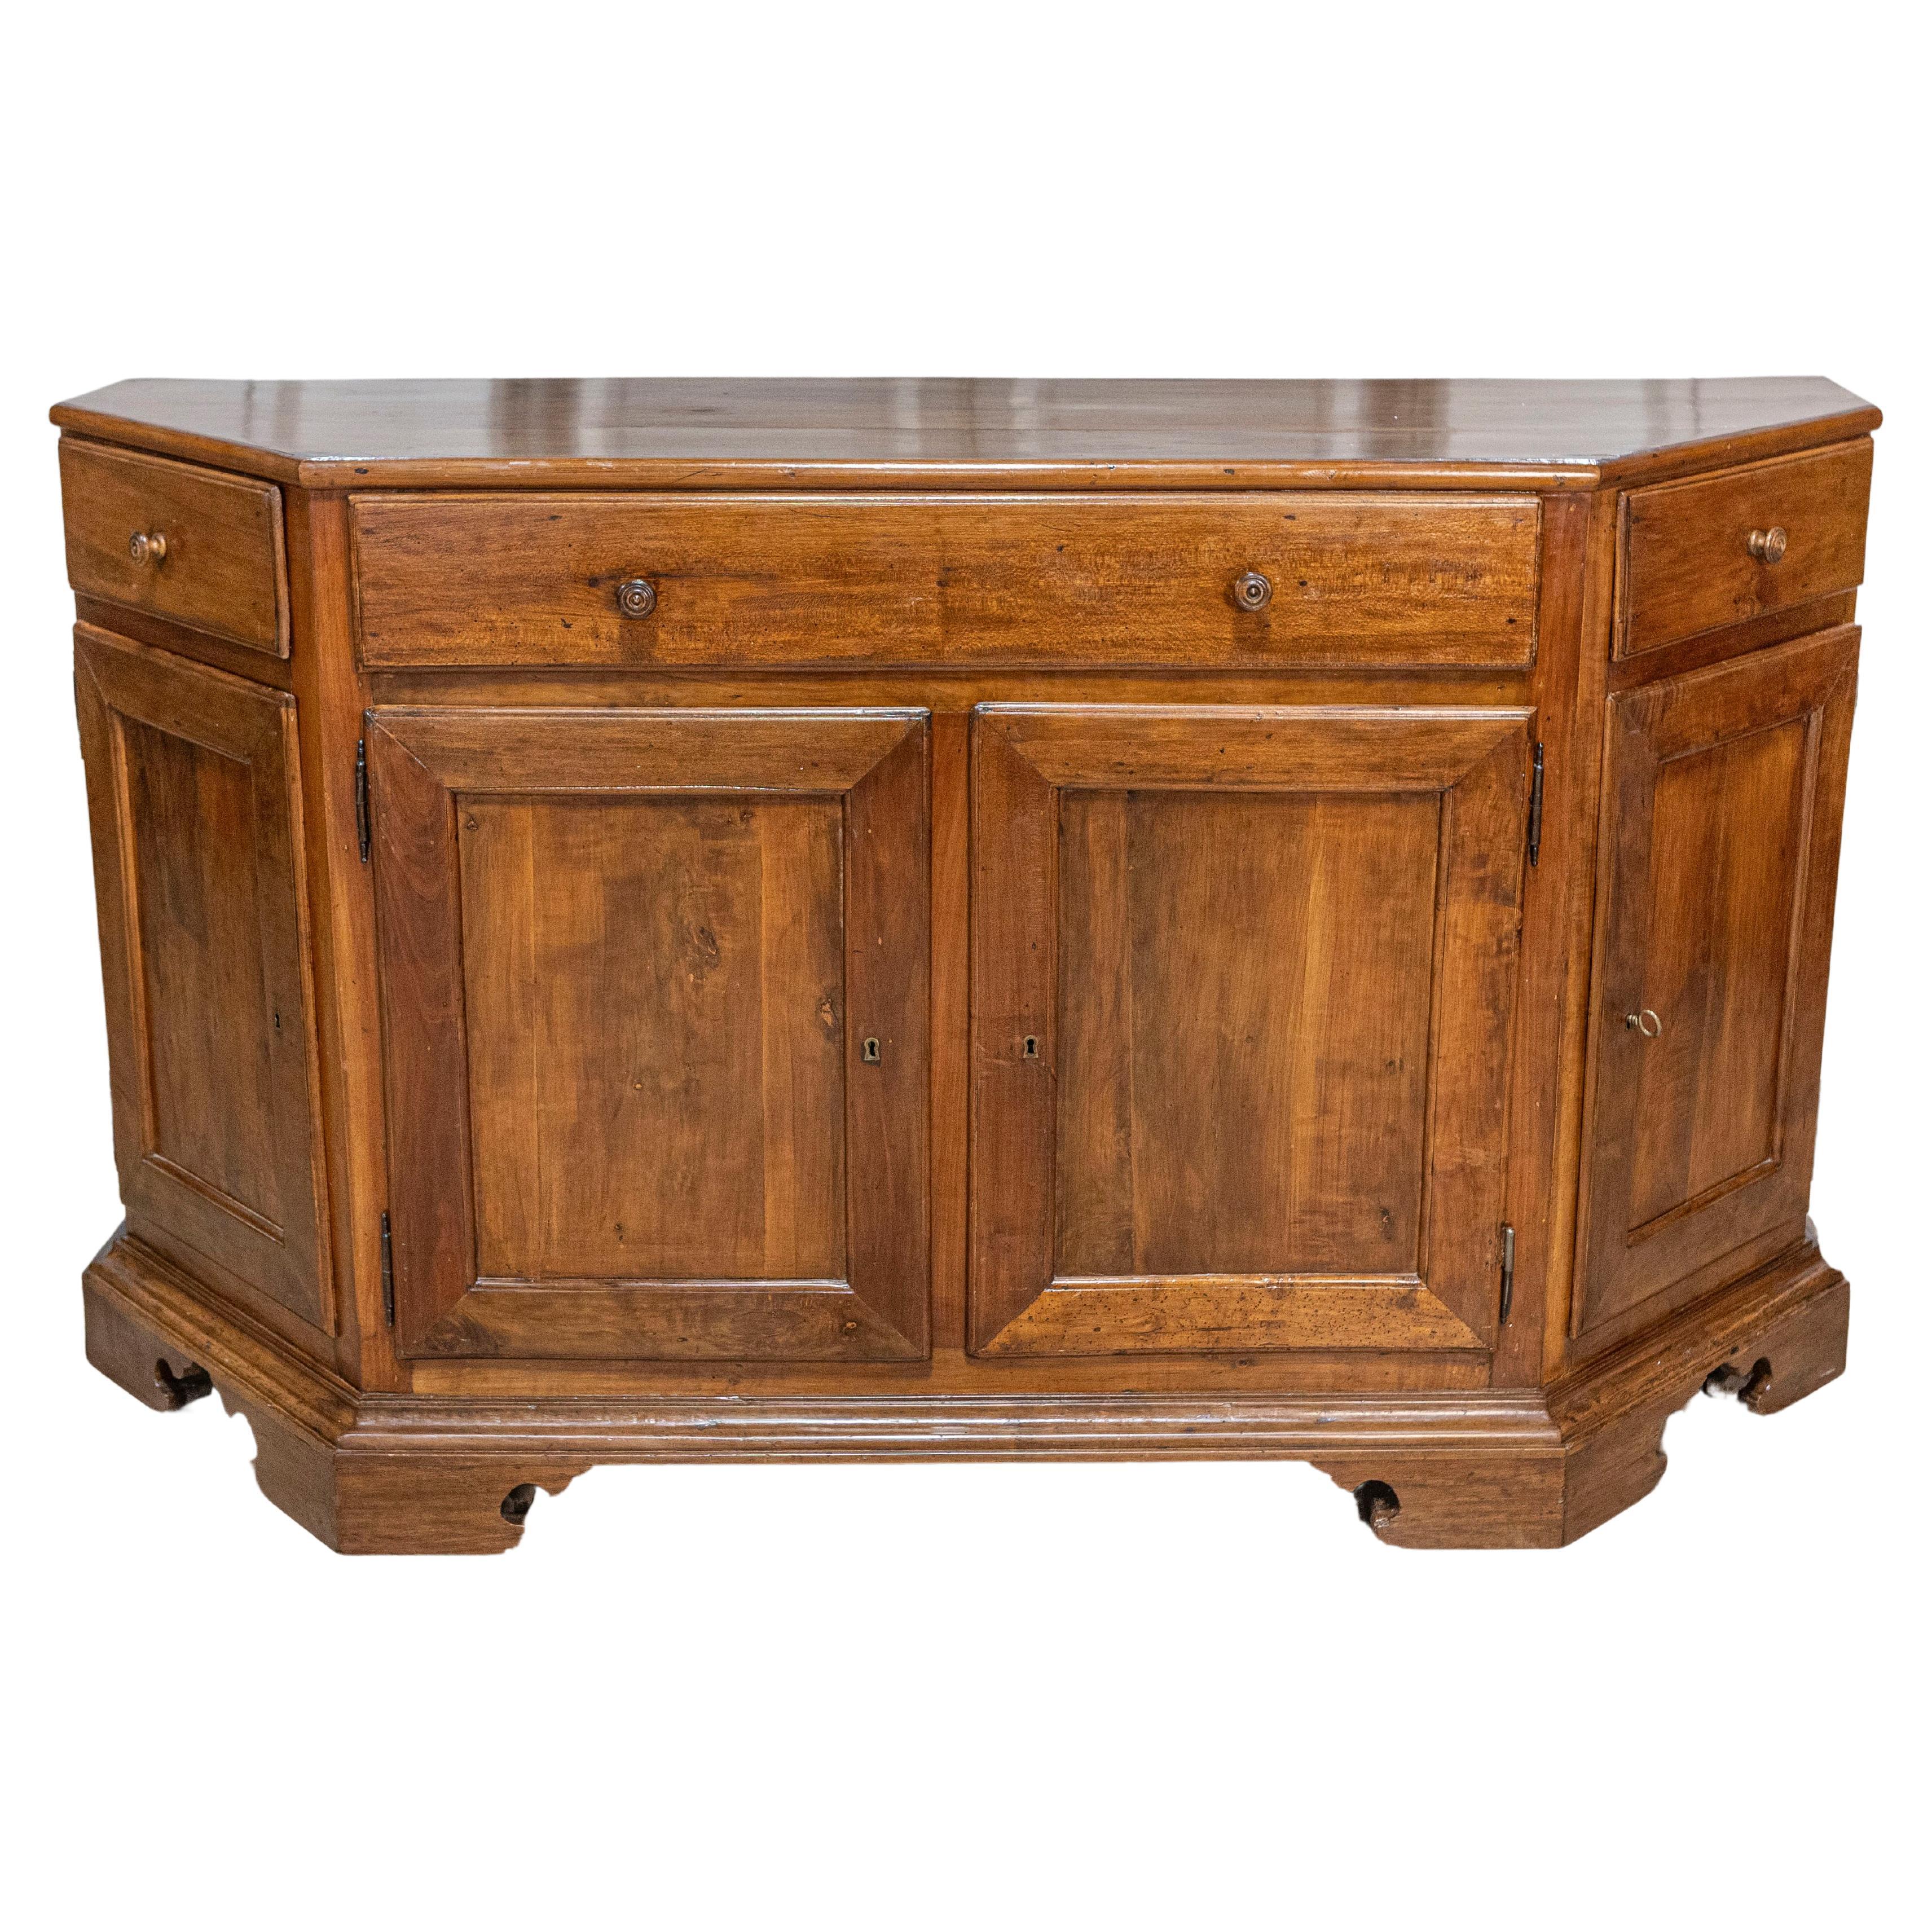 Italian 19th Century Walnut Credenza with Drawers over Doors and Canted Sides